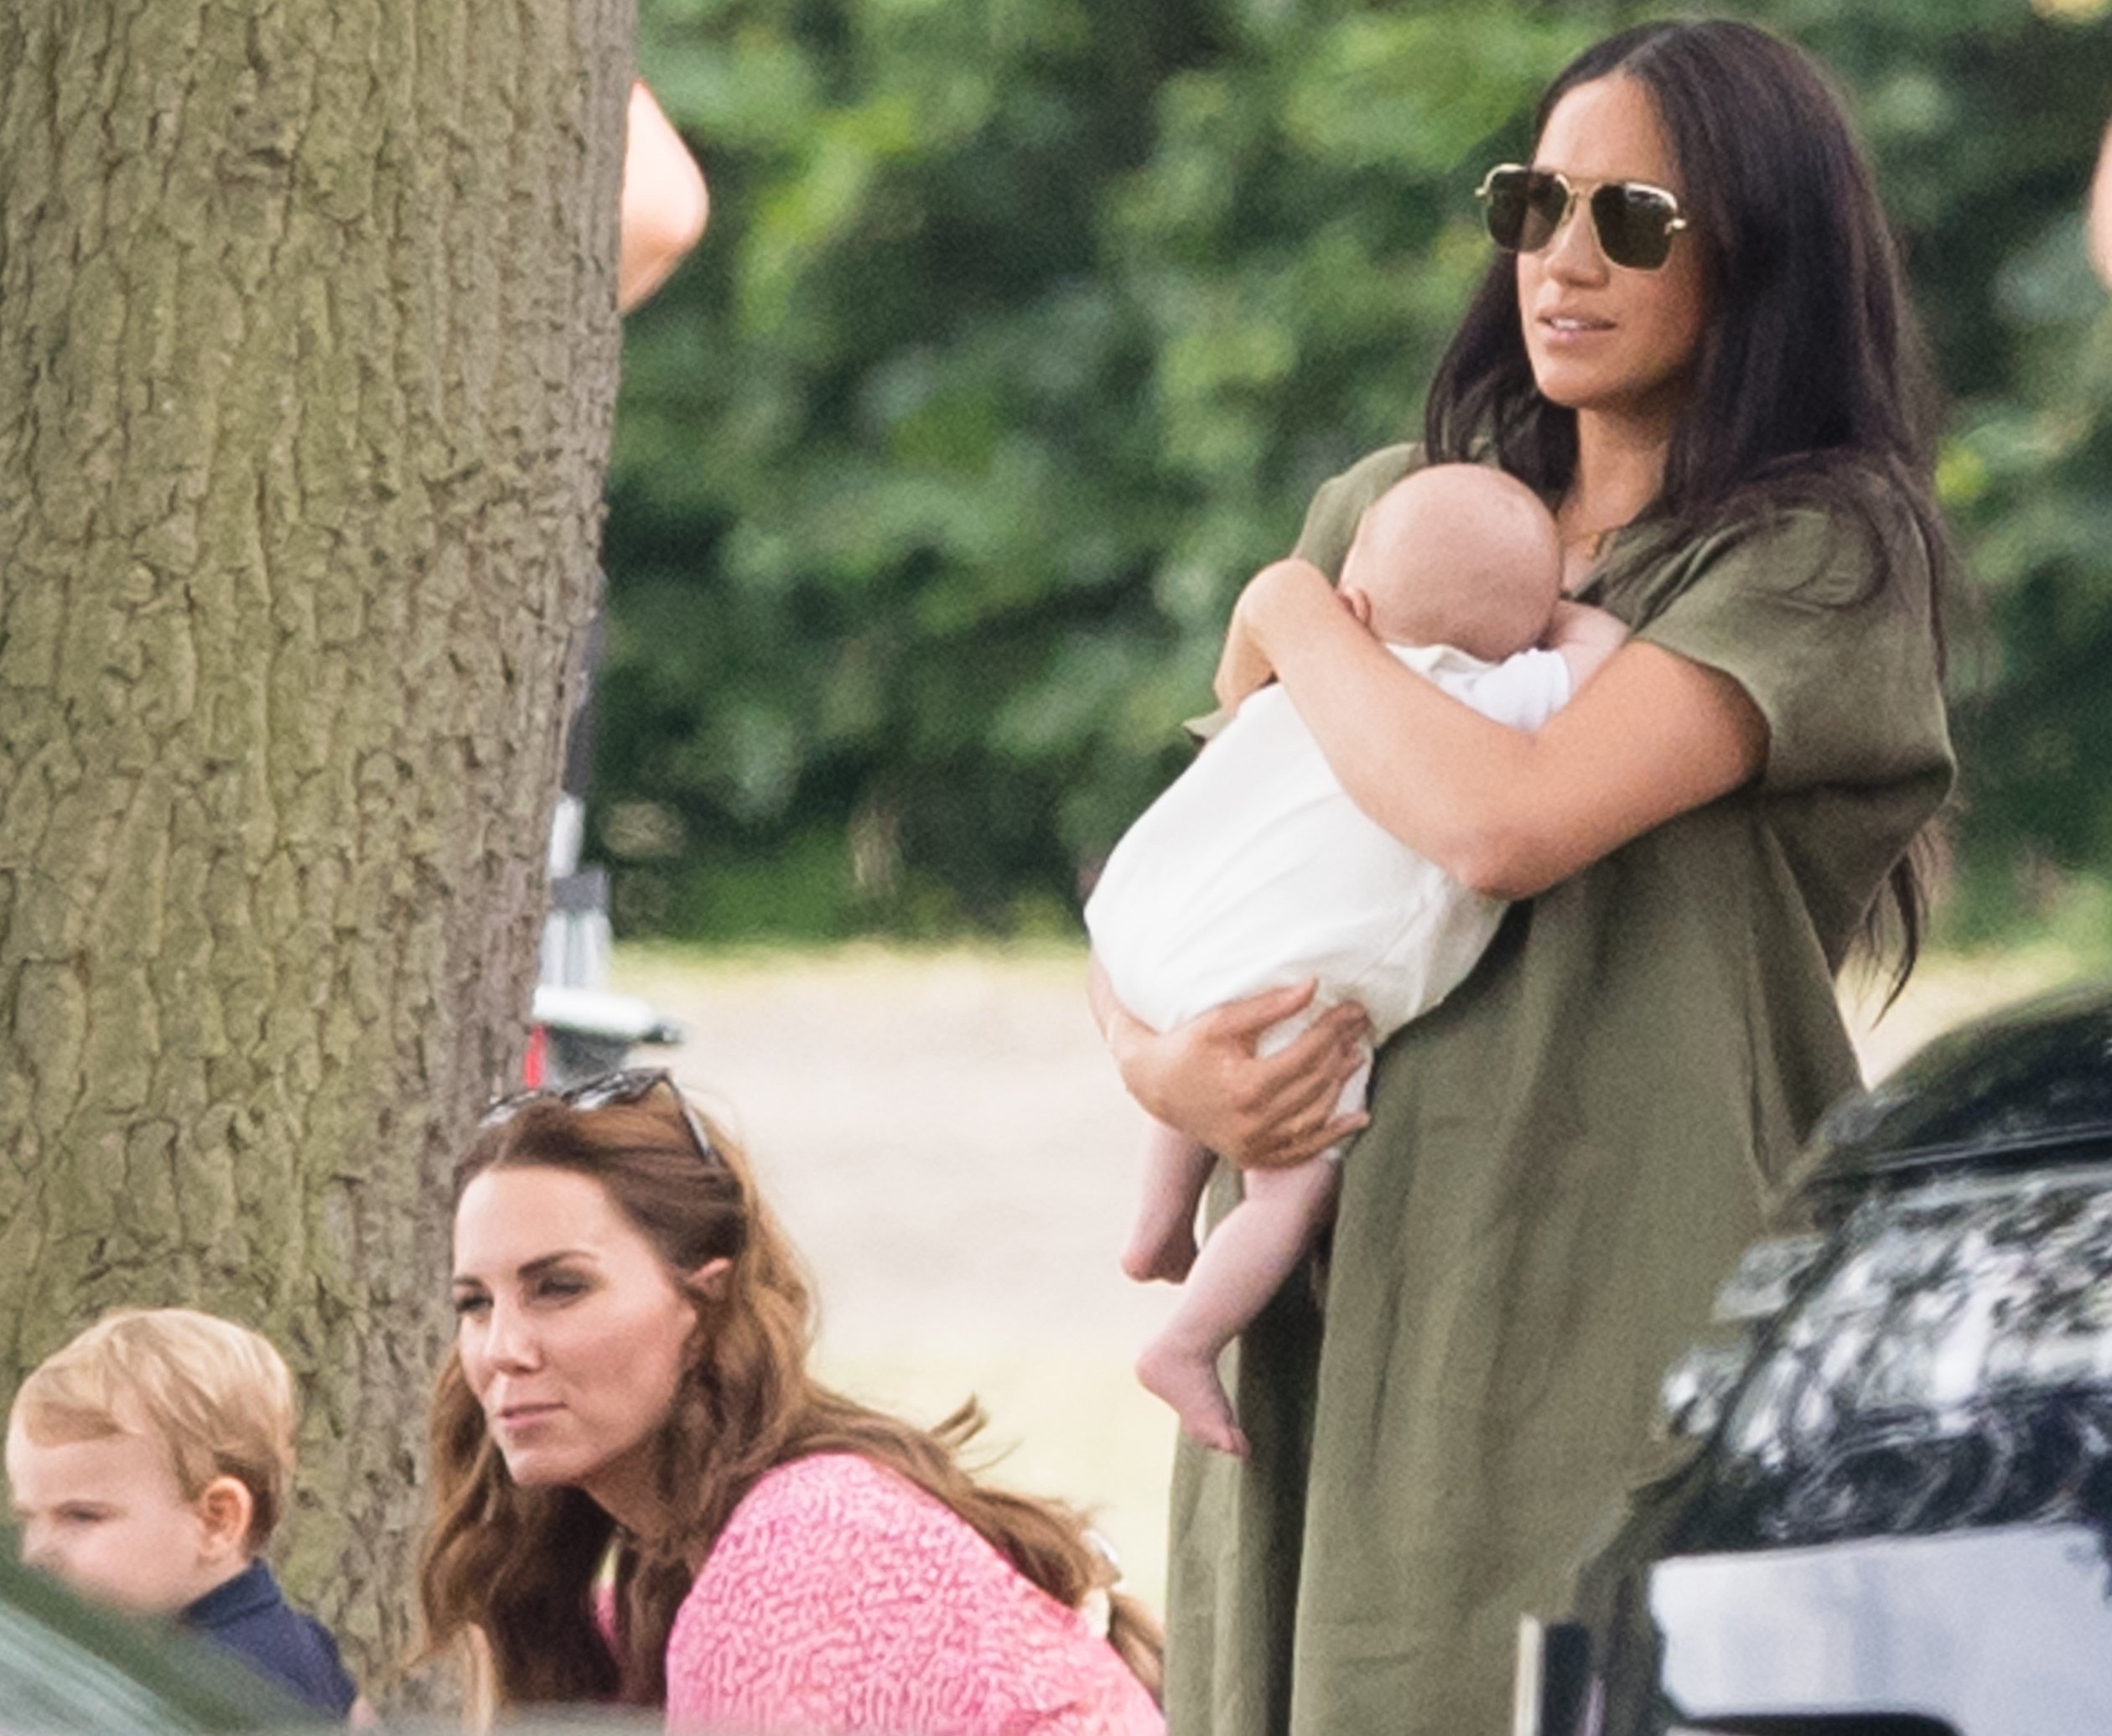 Meghan Markle and Kate Middleton in the park with their children as they watch their husbands play charity polo match